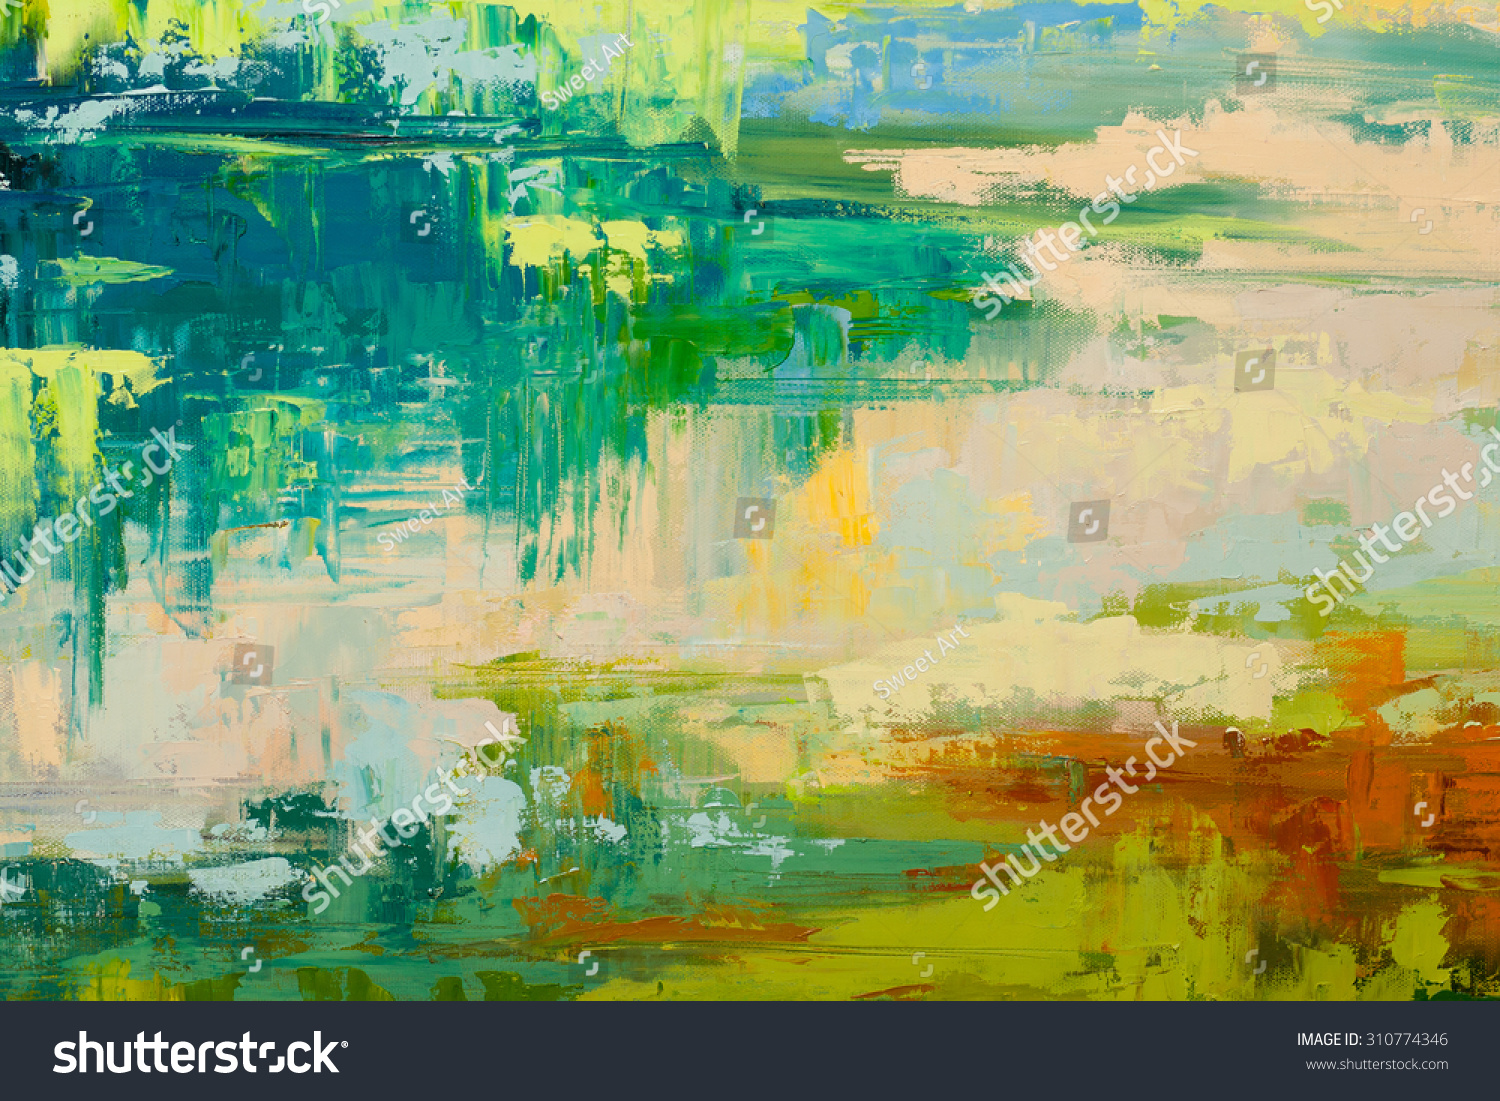 Abstract Art Background Oil Painting On Stock Illustration 310774346 ...